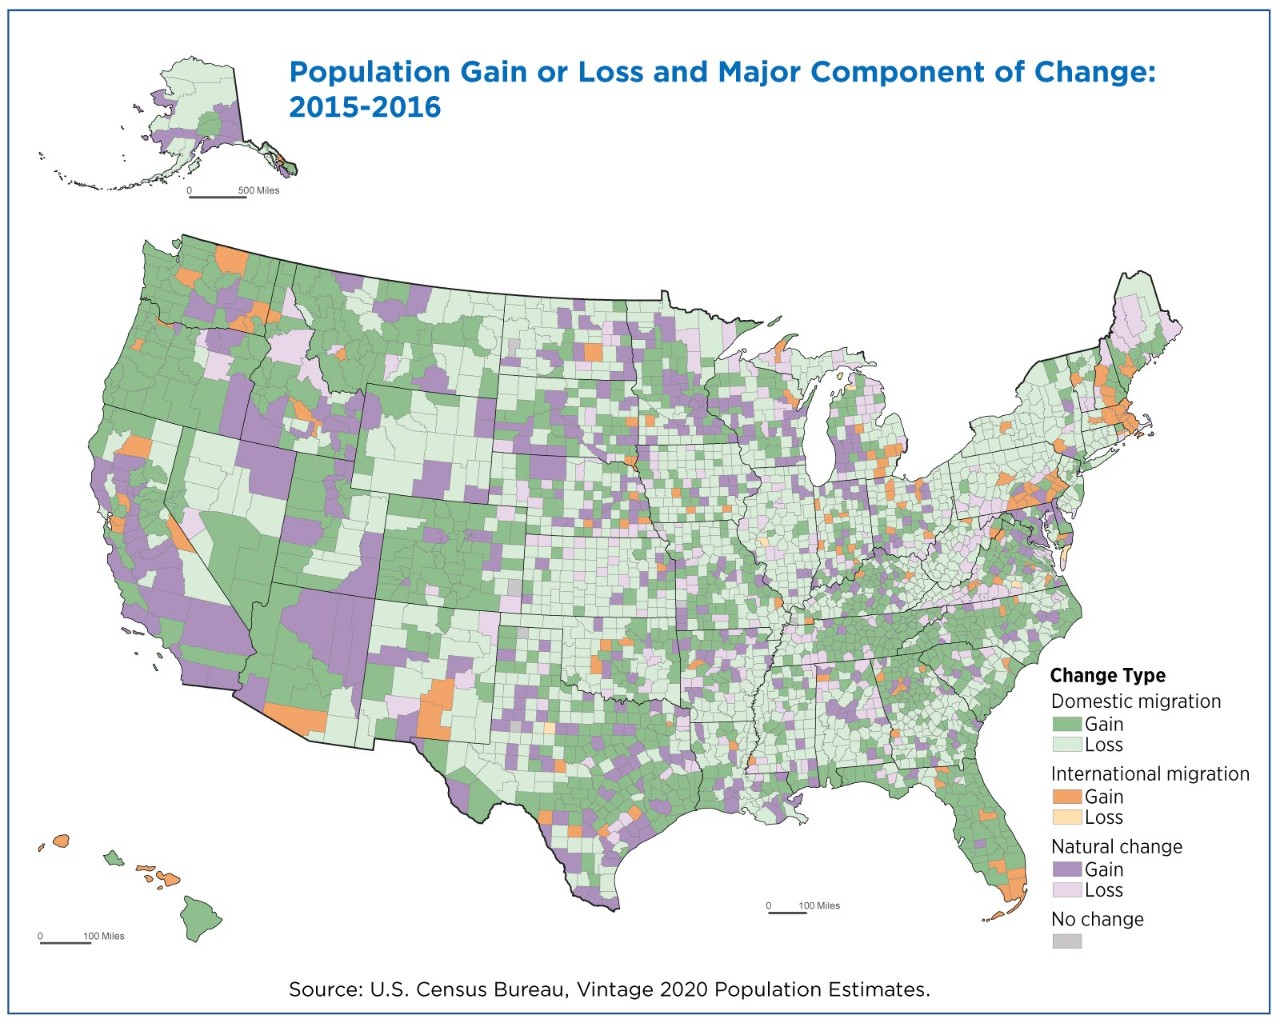 Population gain or loss and major component of change: 2015-2016